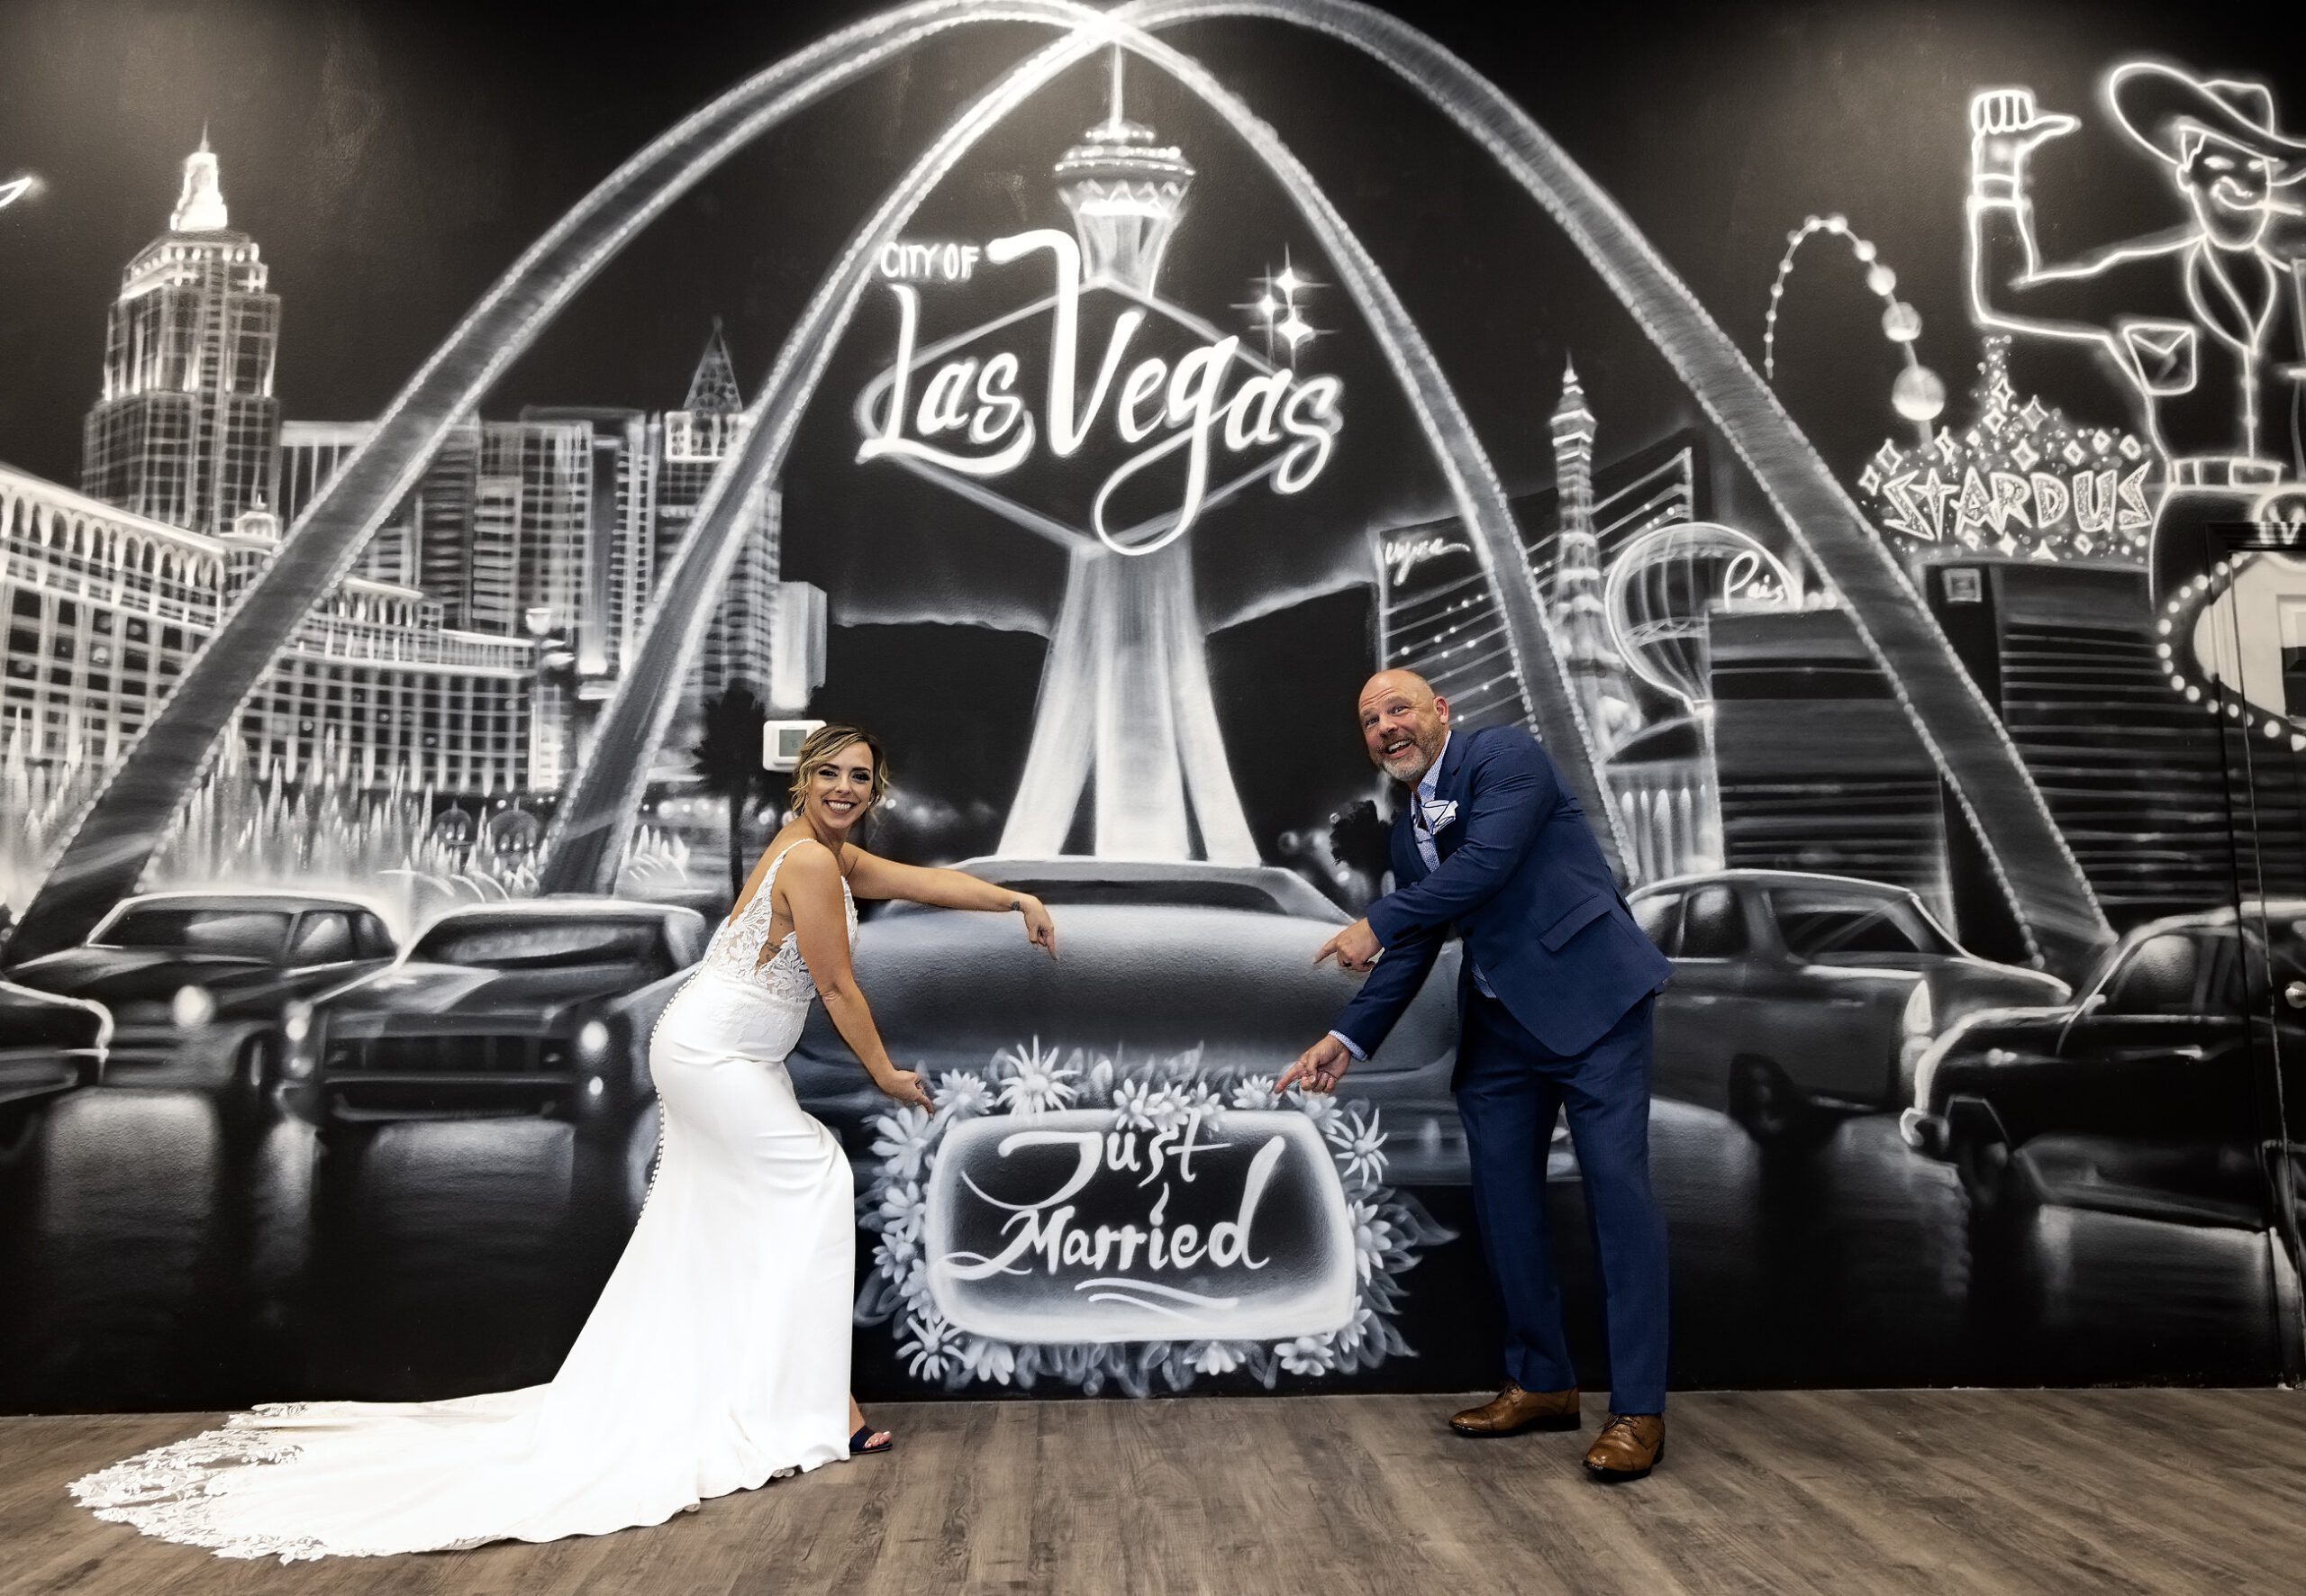 A bride and groom posing in front of a las vegas sign.